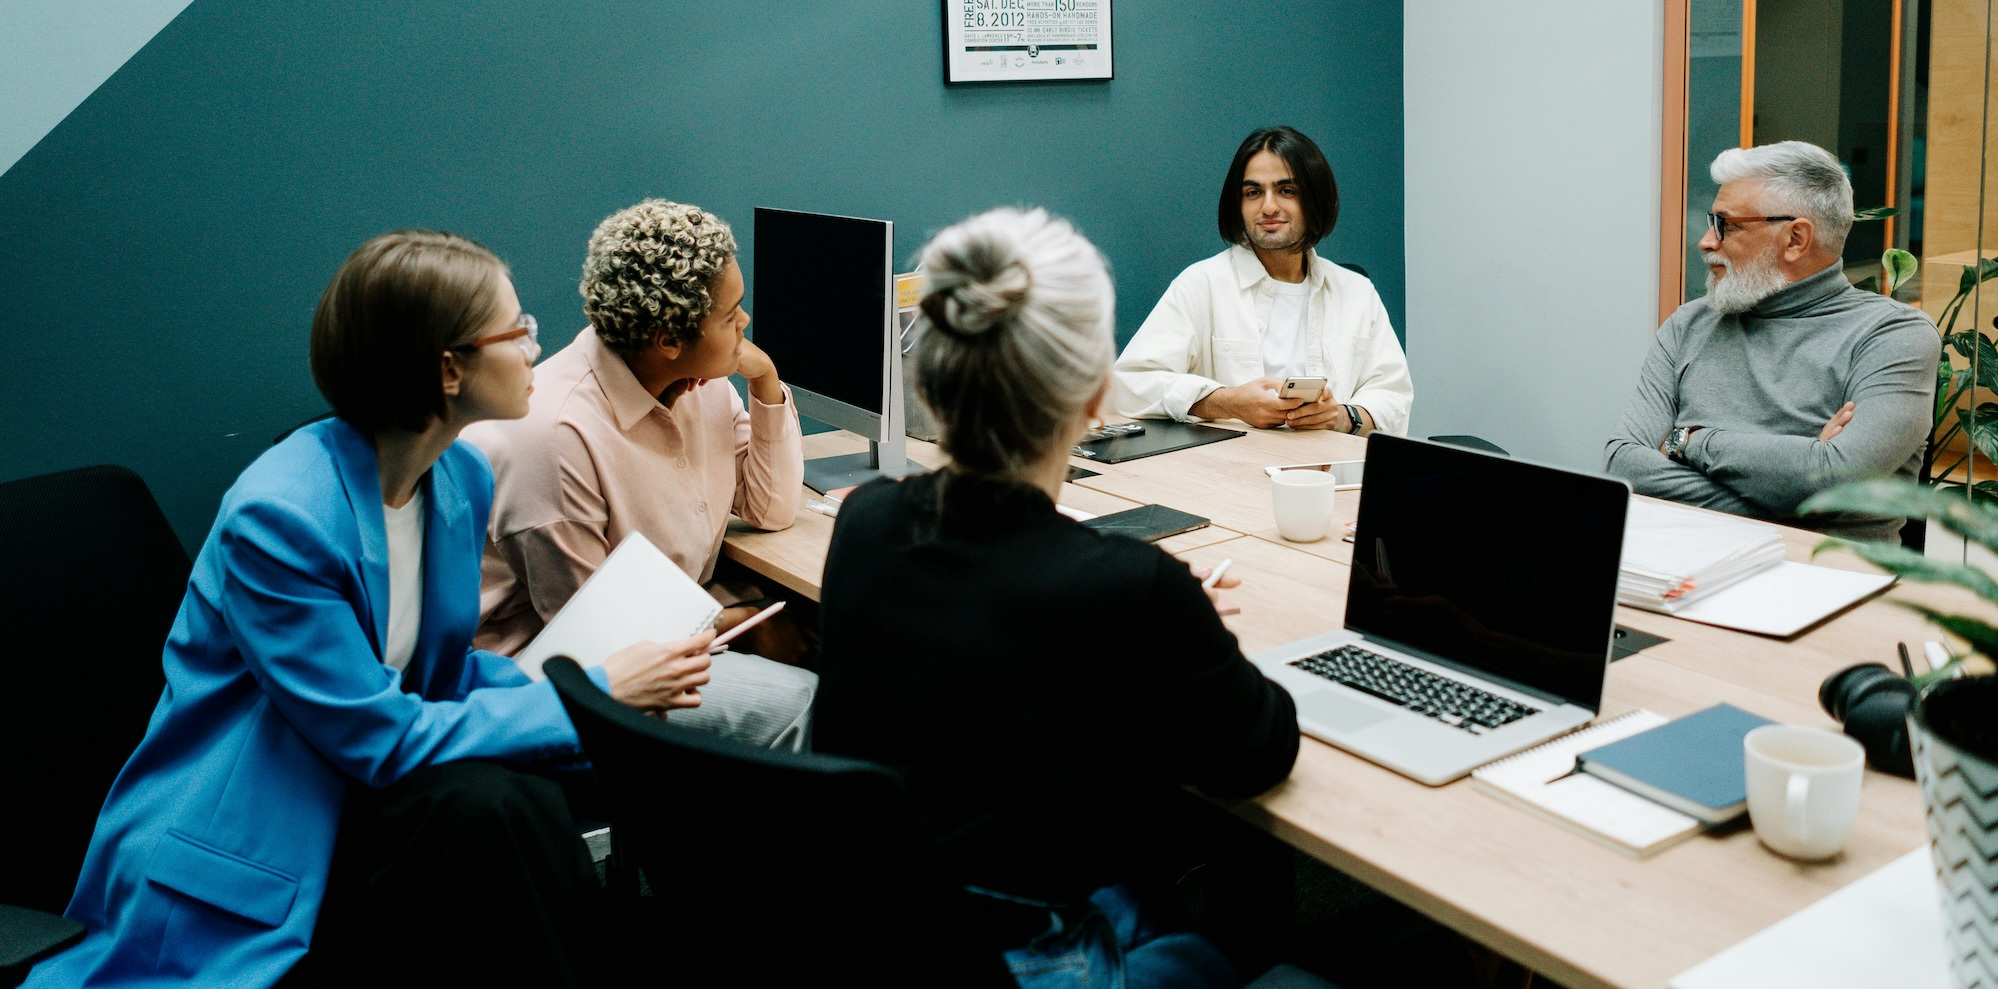 A group of 5 people congregate in an office to have a discussion.